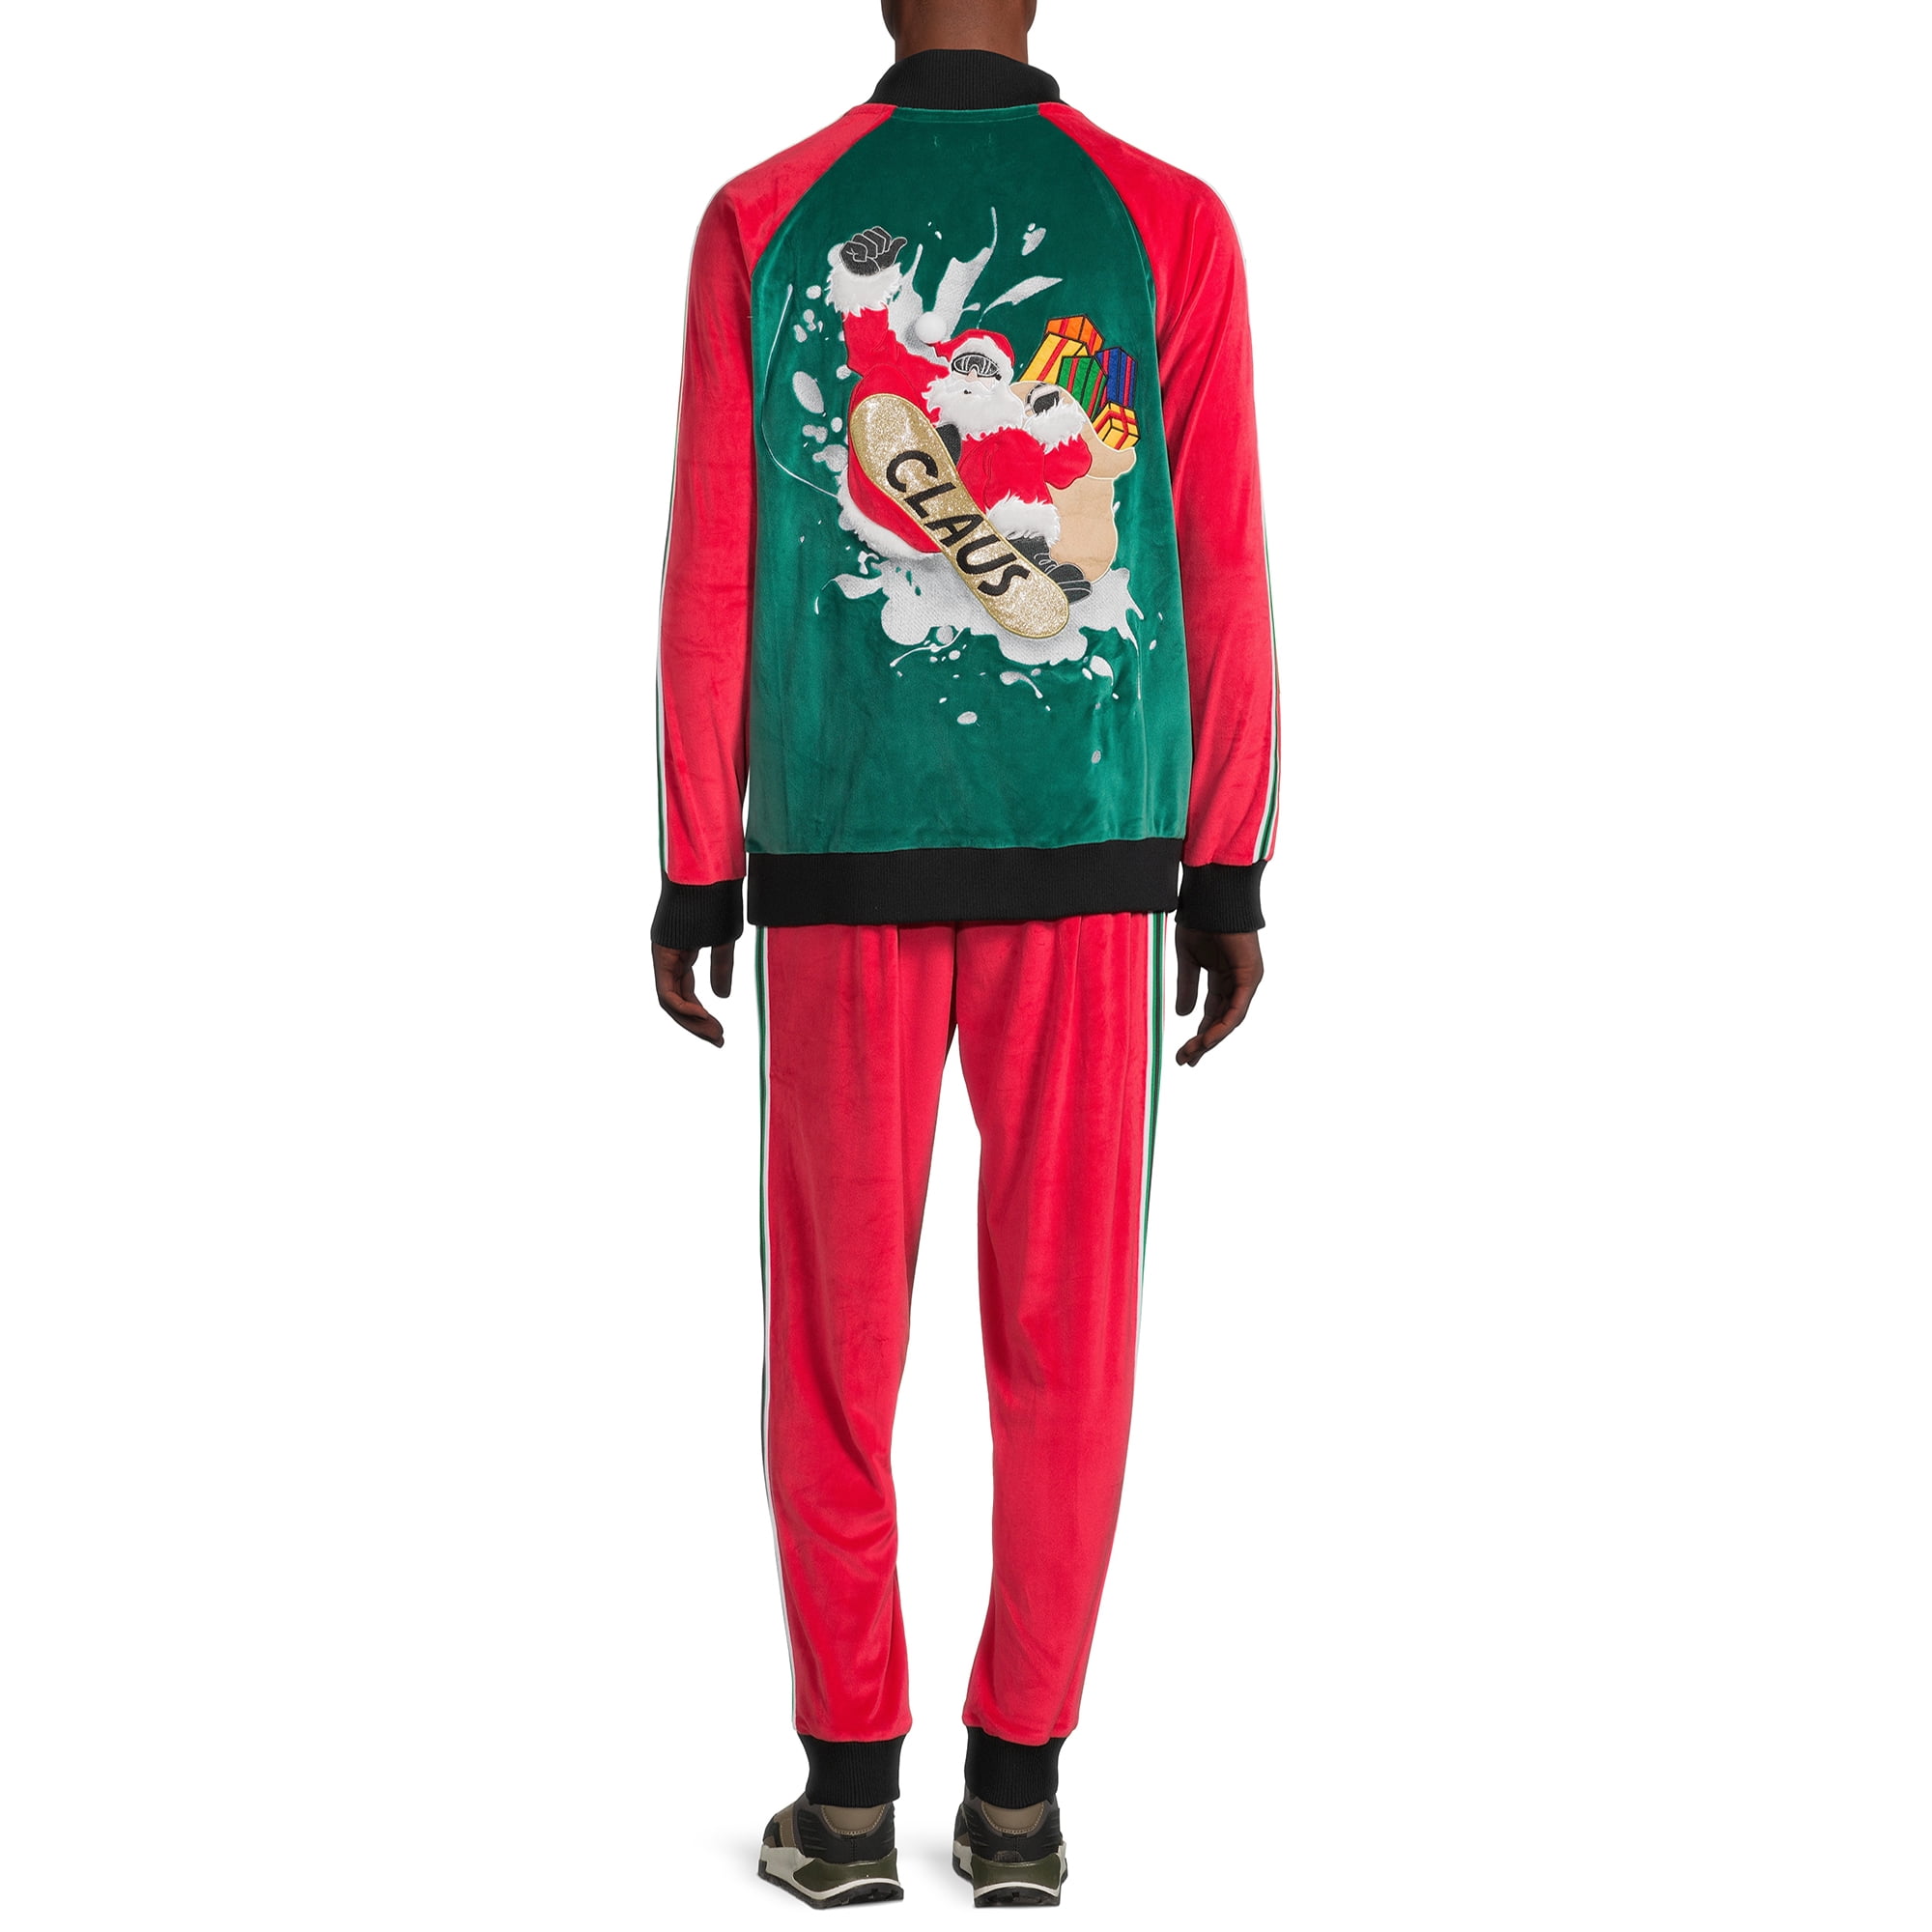 Jolly Knits Men's Ugly Christmas Tracksuit Set, 2 Piece Outfit Set